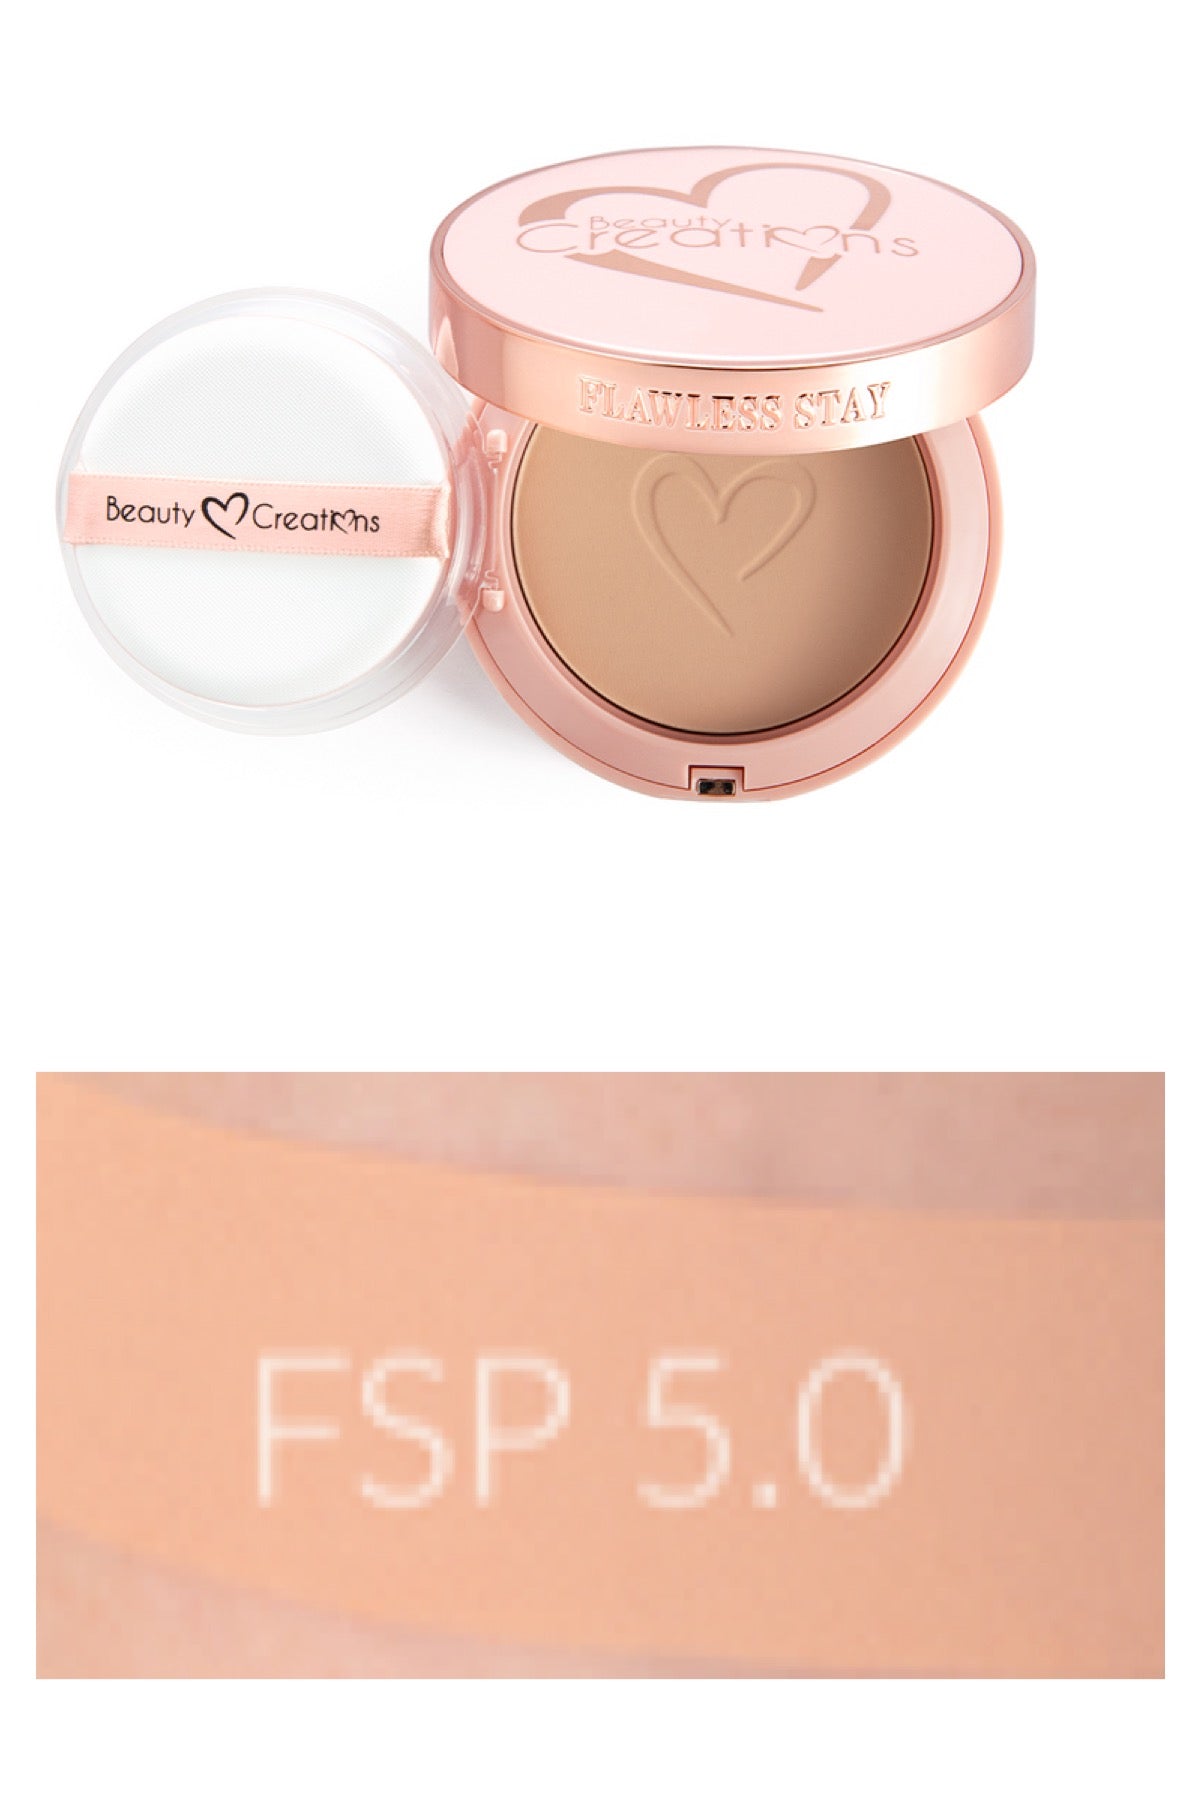 Flawless Stay Powder Foundations Vibe Clothing Company 5.0 